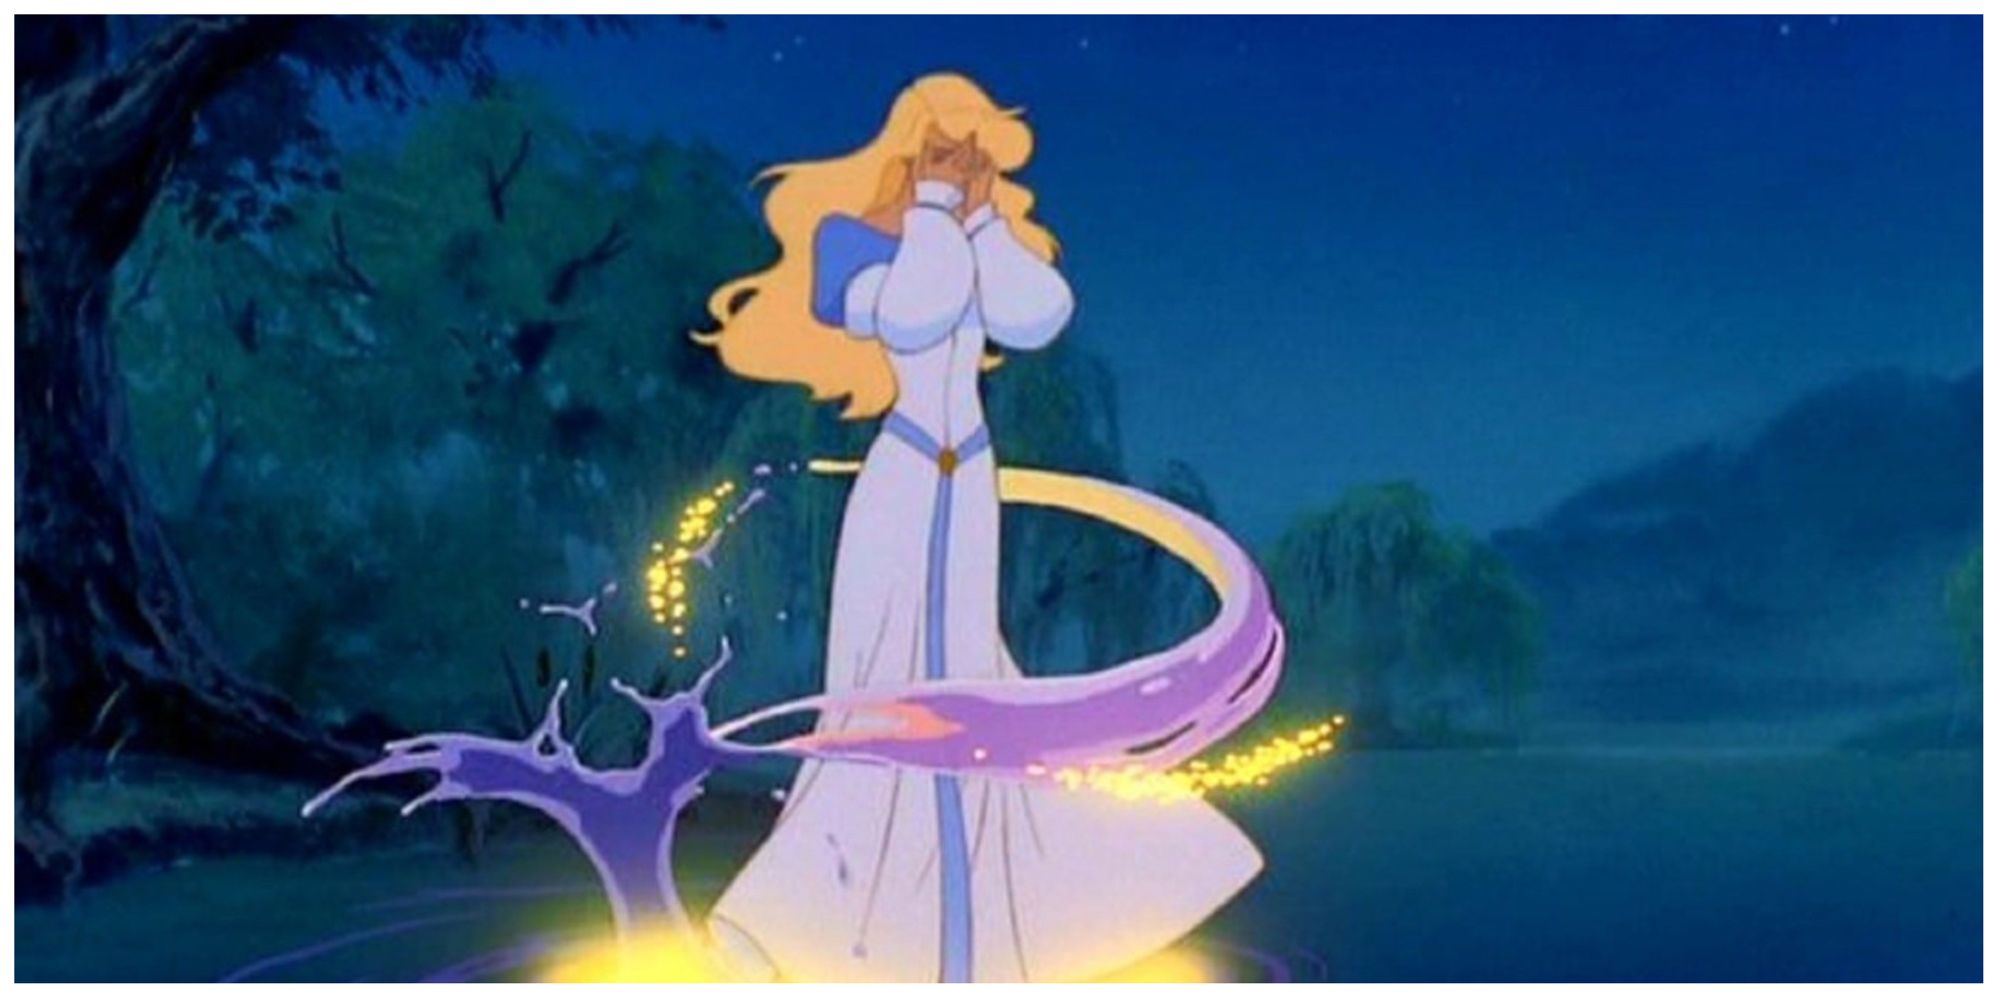 Odette transforming into a swan in Swan Princess